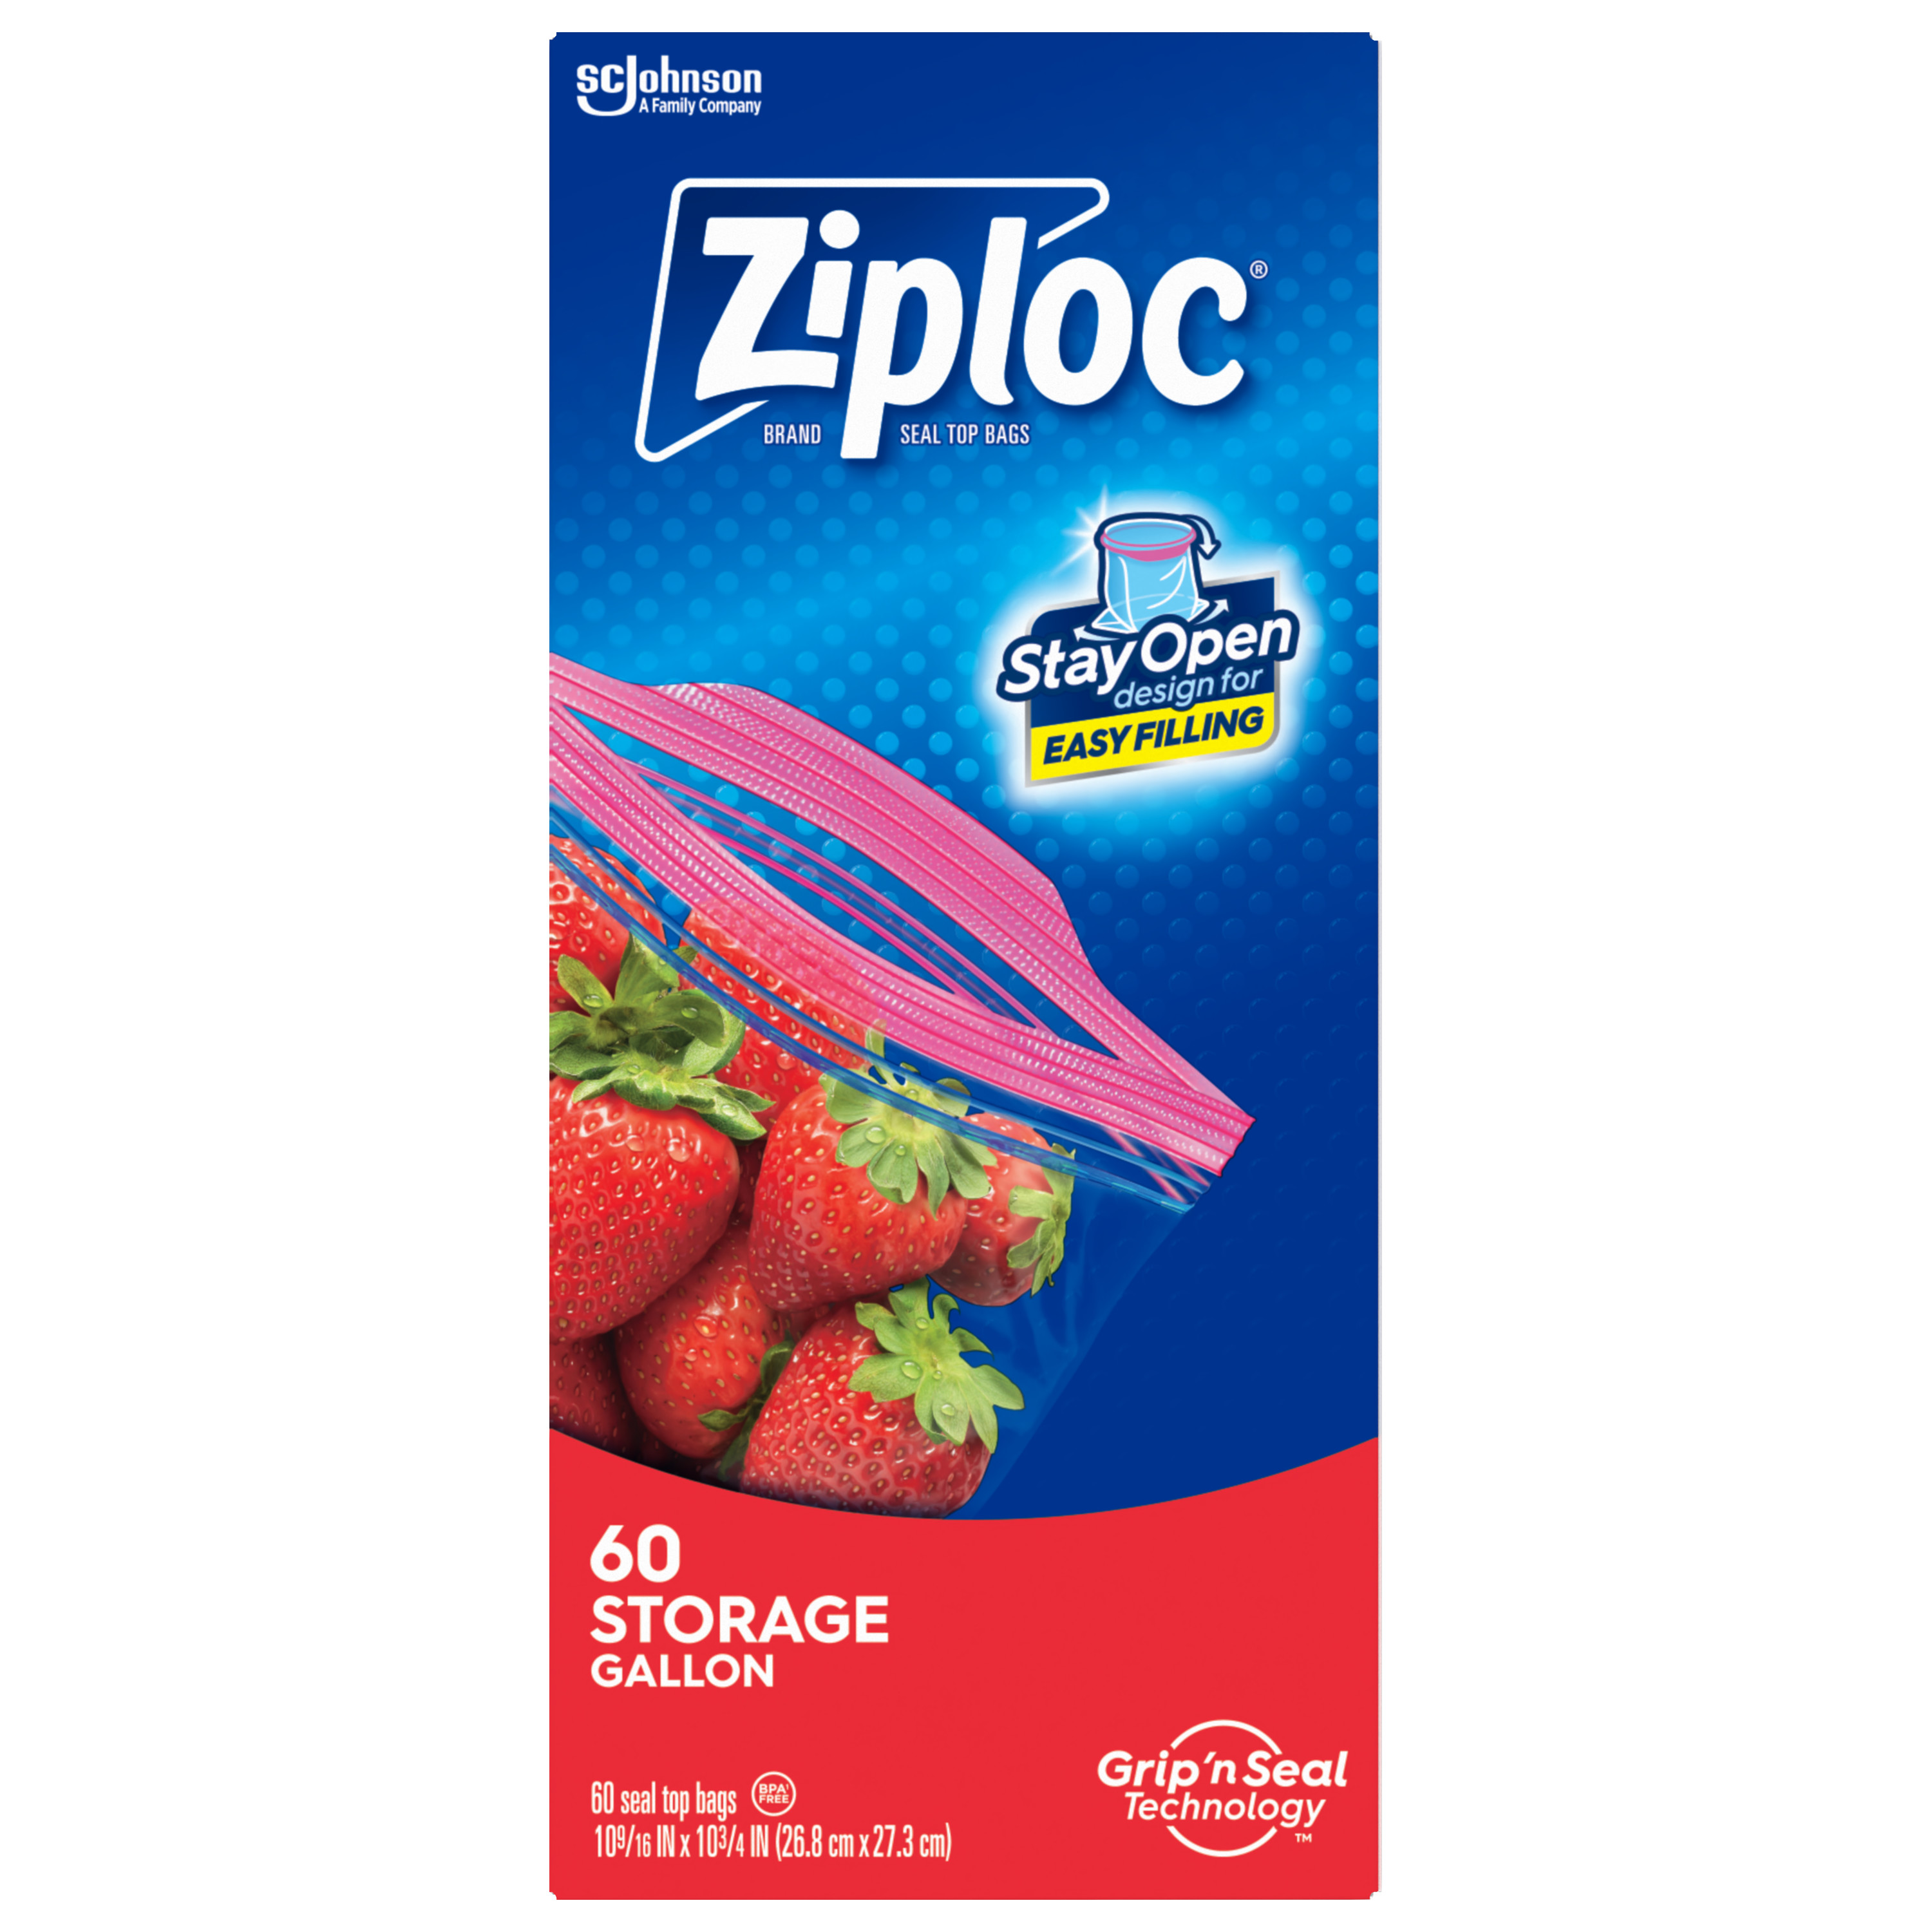 Ziploc® Brand Gallon Storage Bags with Stay Open Technology, 60 Count - image 14 of 19